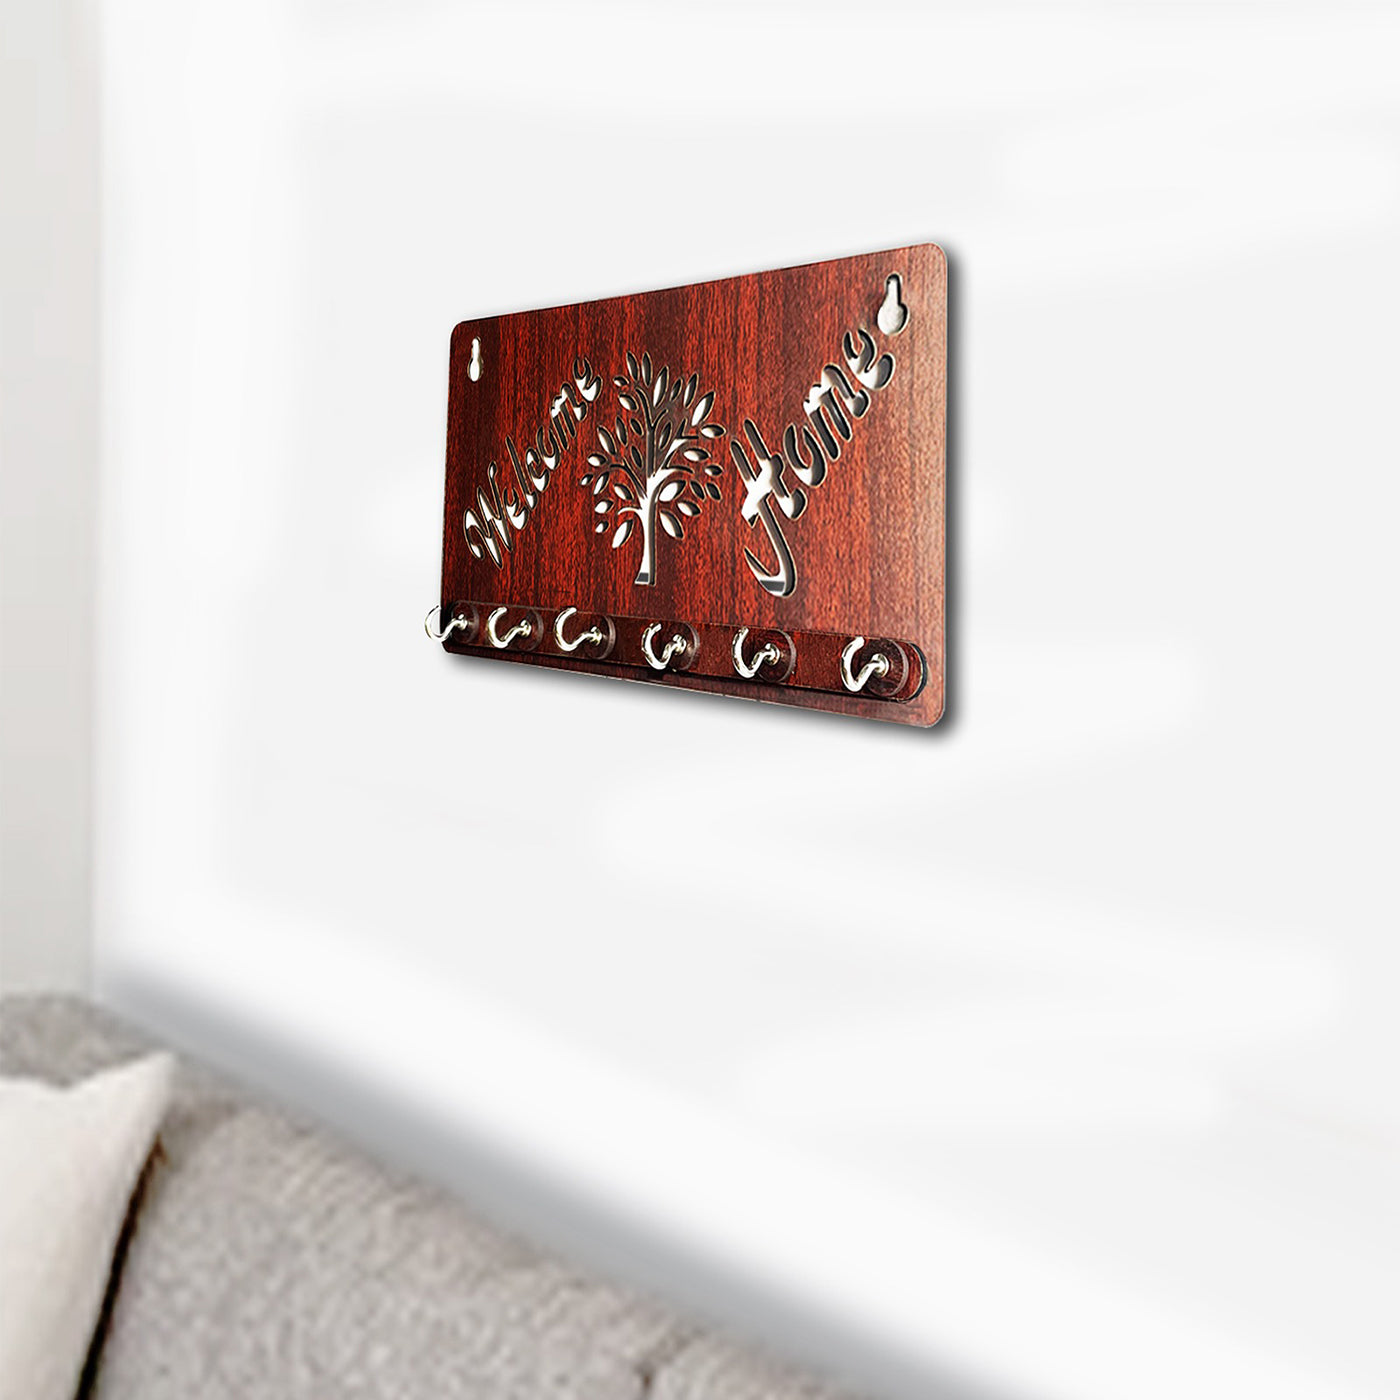 Welcome home wooden key holder | 6 hook wall hanging | wall decor | home decor | gifting